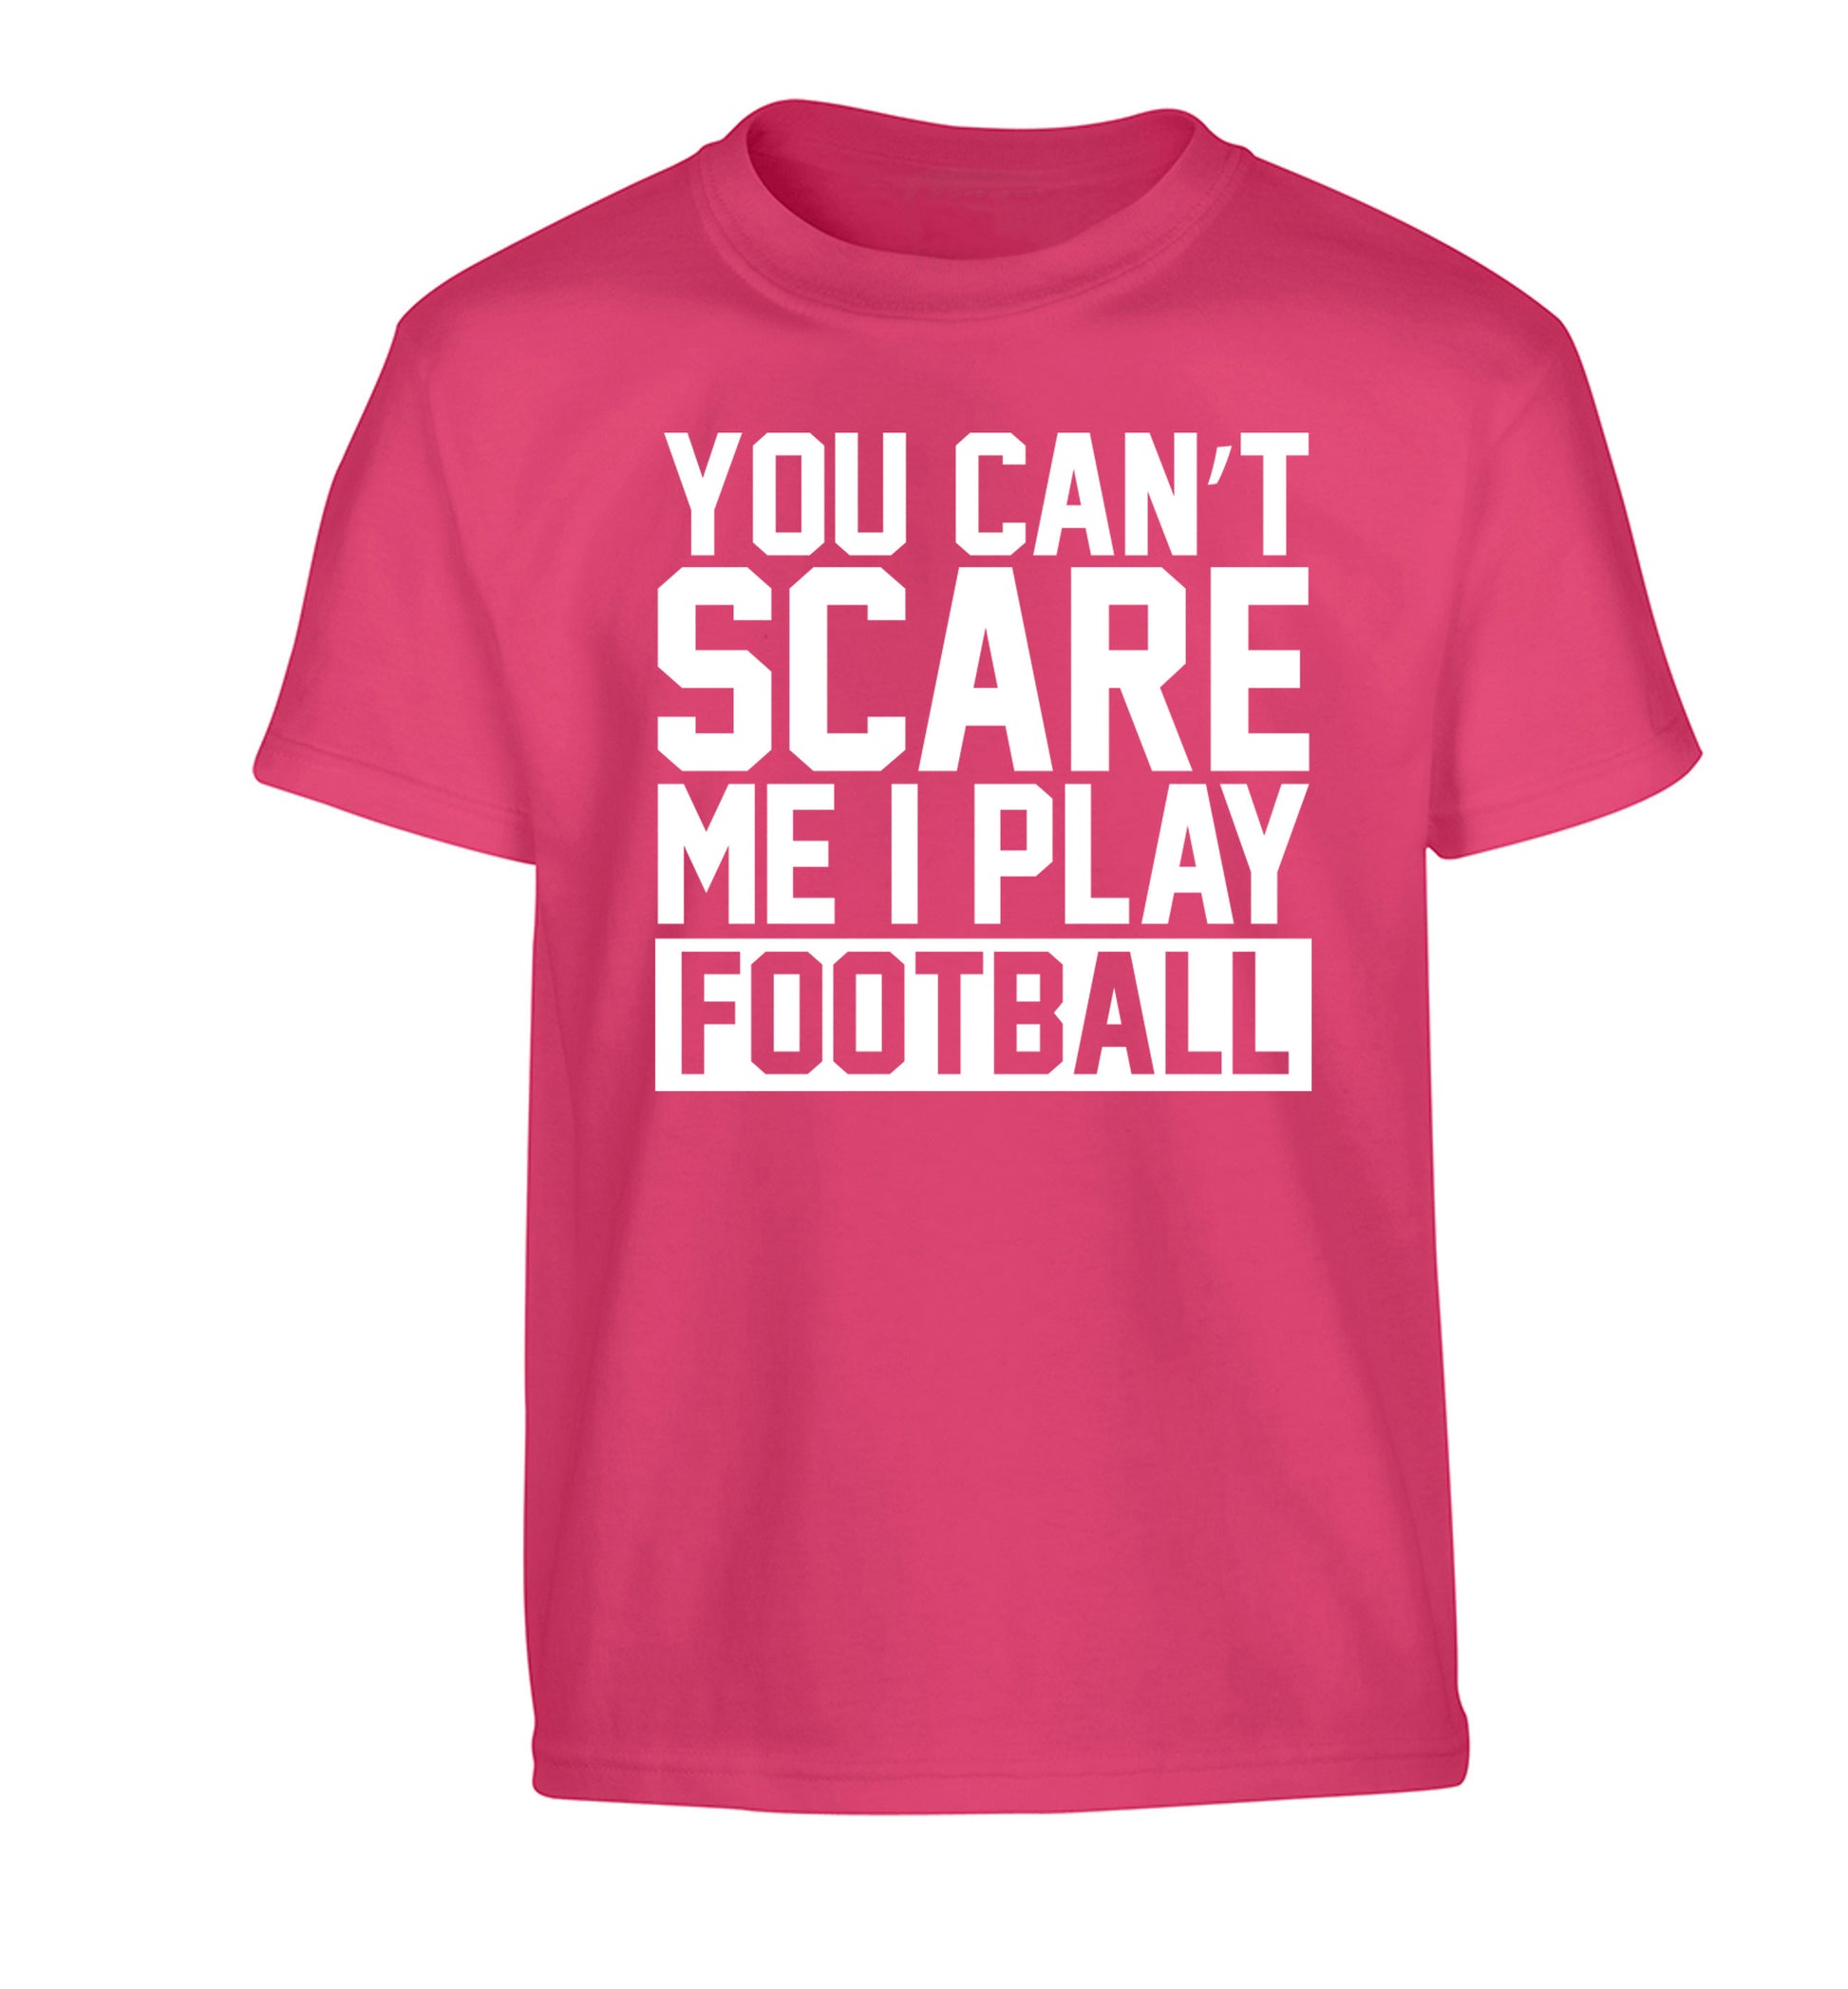 You can't scare me I play football Children's pink Tshirt 12-14 Years